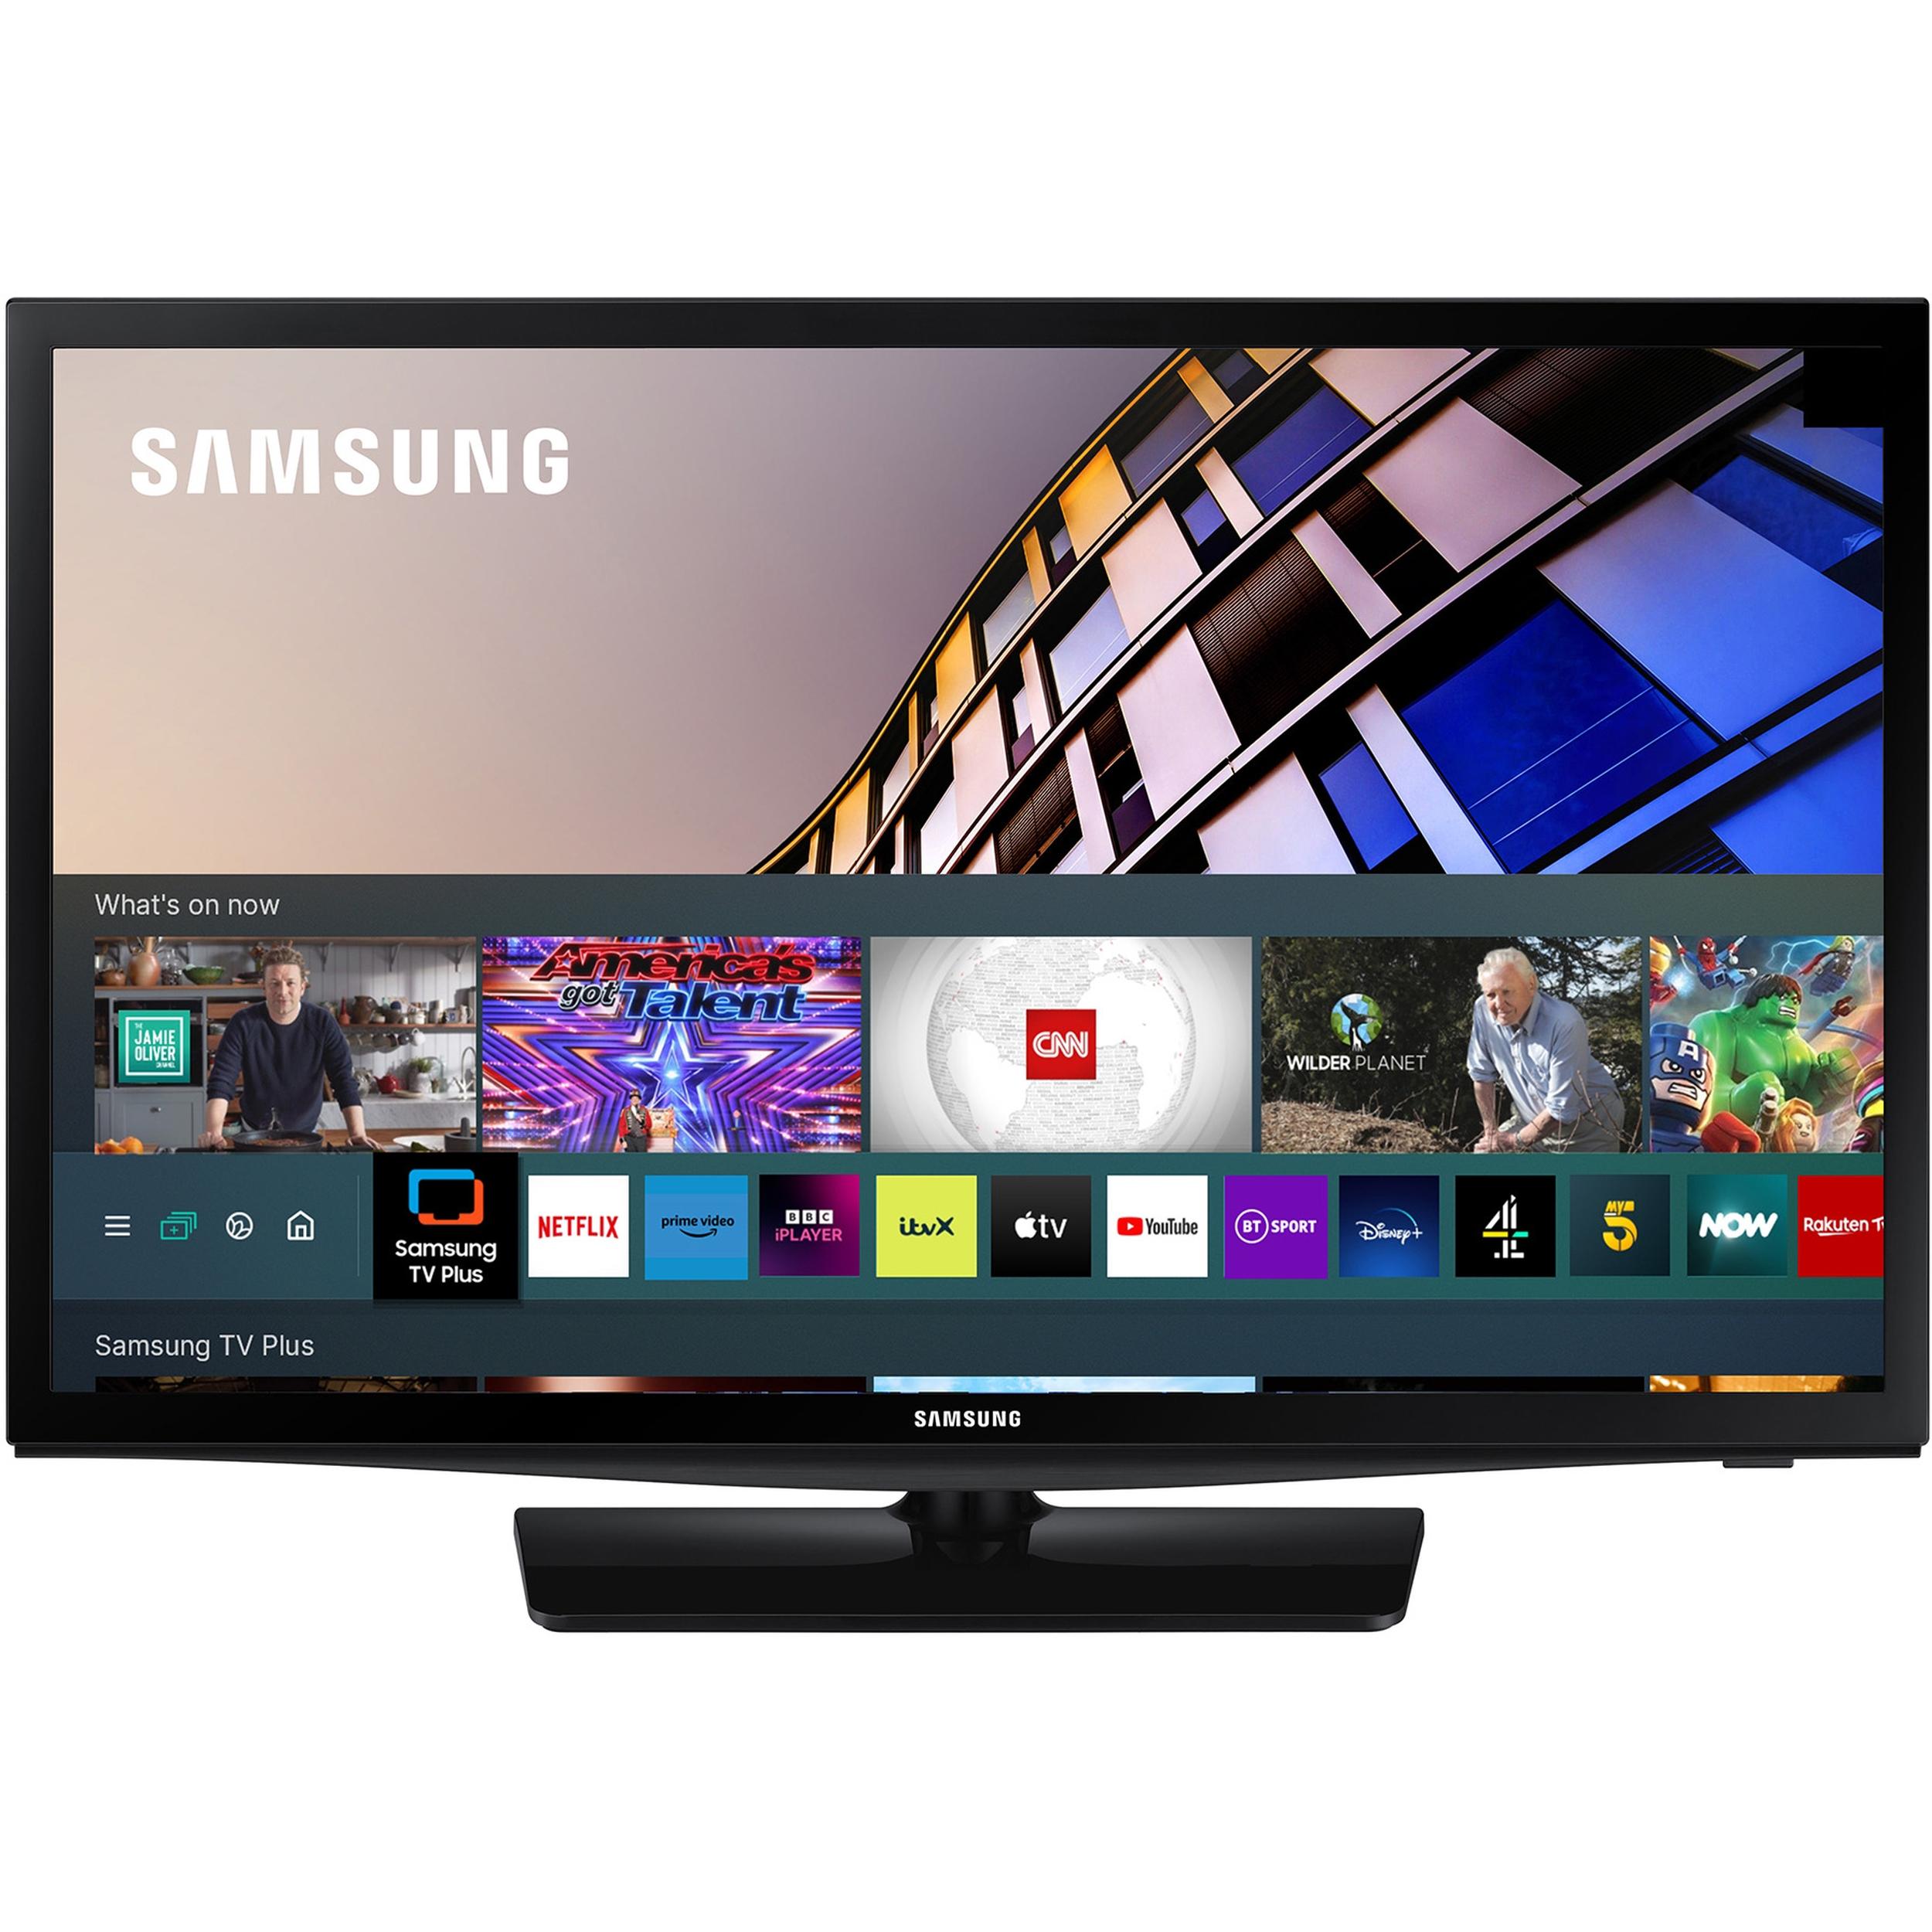 TV Samsung HD 24N4305 - Smart TV 24, HDR, Ultra Clean View, PurColor,  Micro Dimming Pro